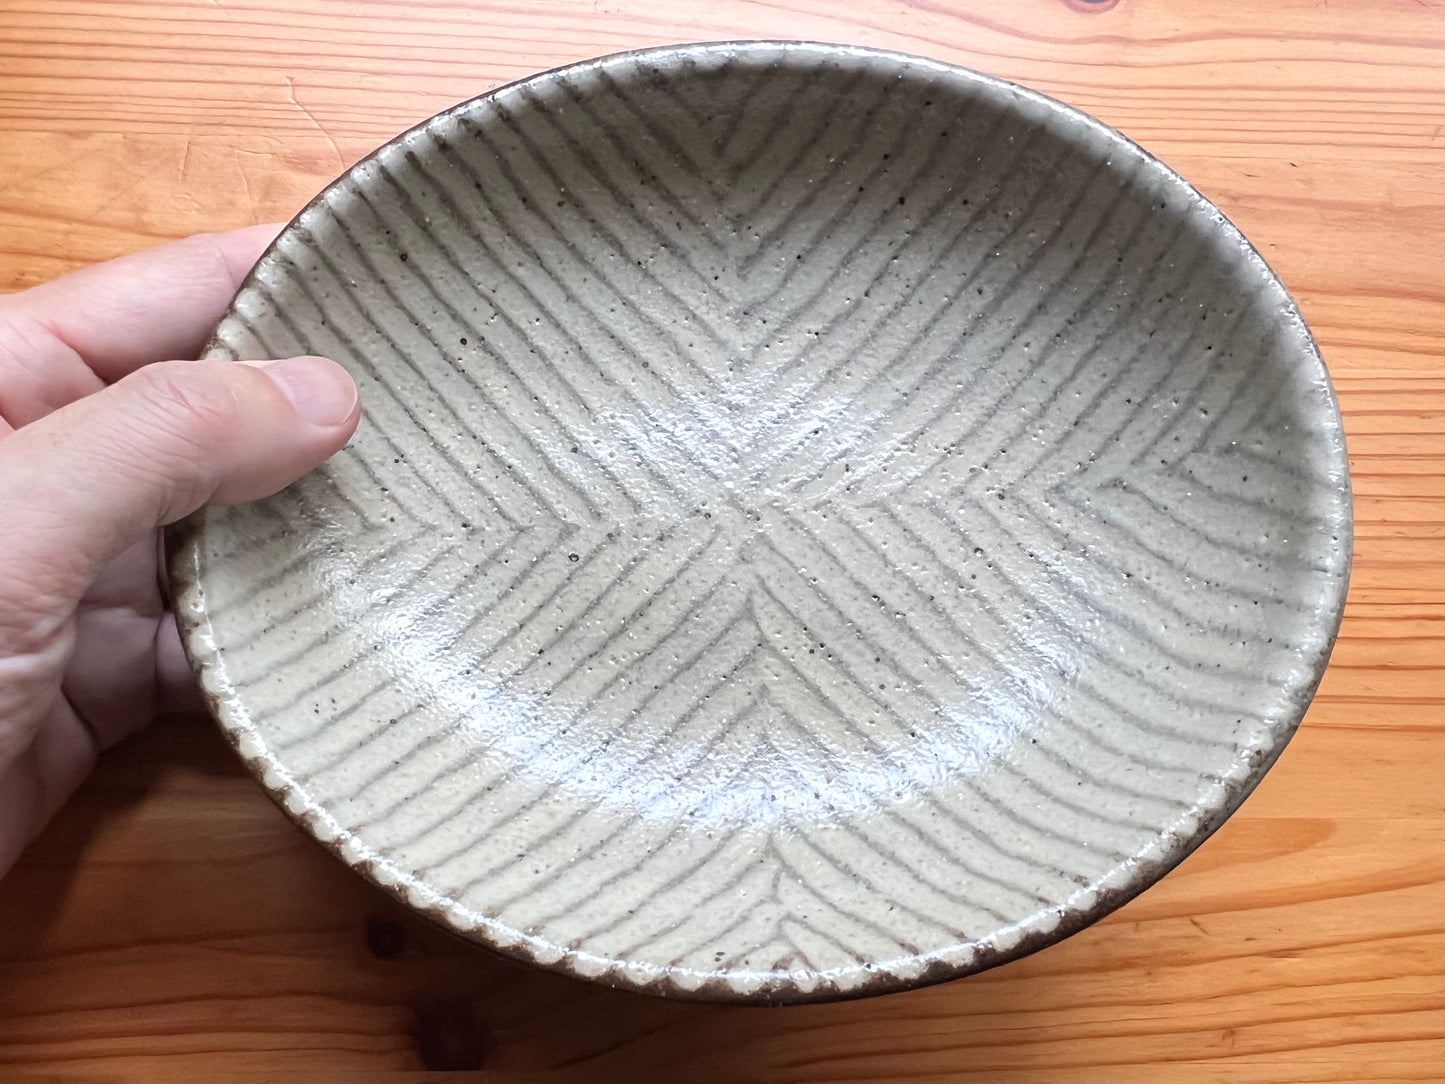 [Product with reason] Eiichi Koubou - 7 inch plate - Scraping off